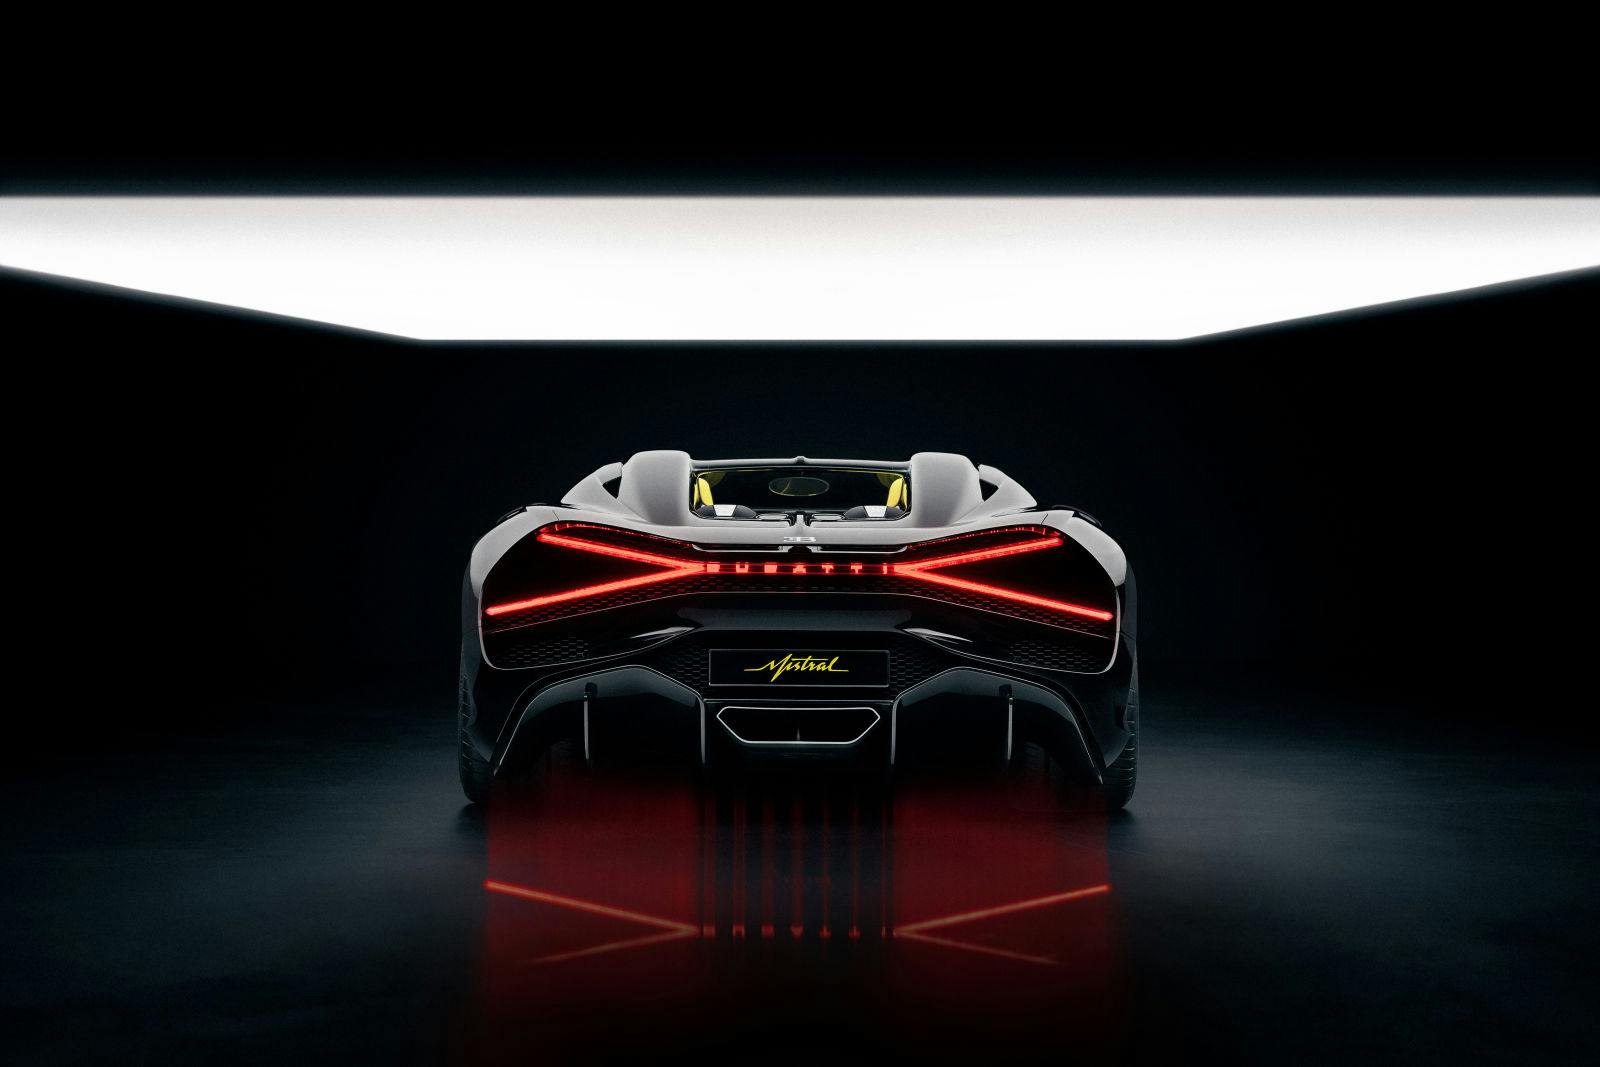 The W16 Mistral’s X-shaped taillights are an elegant reinvention of the Bolide’s iconic design.